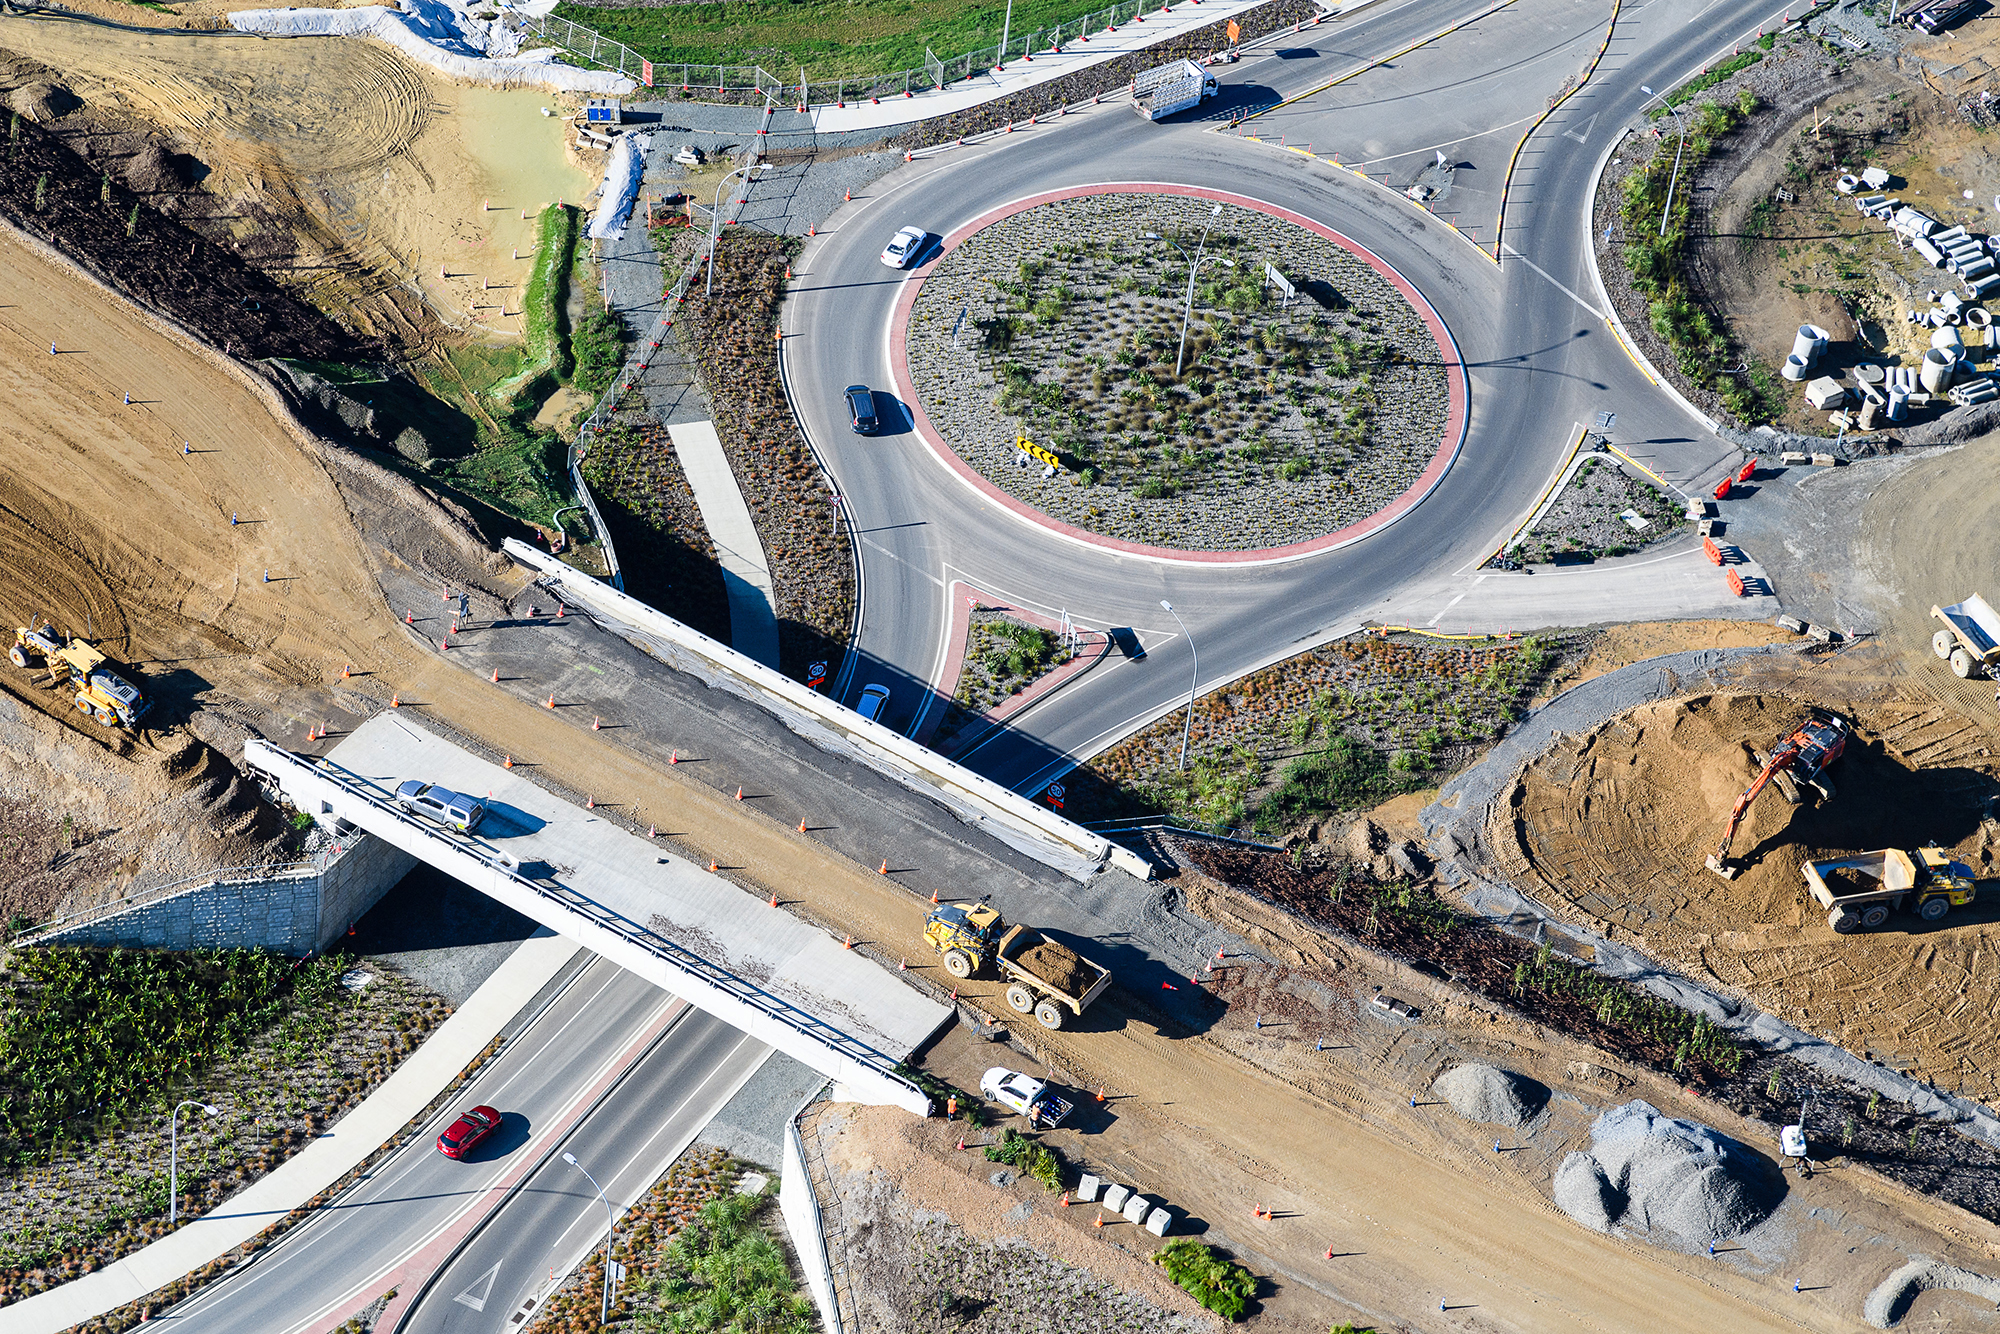 Bridge 13 under construction to the left of roundabout with plantings.